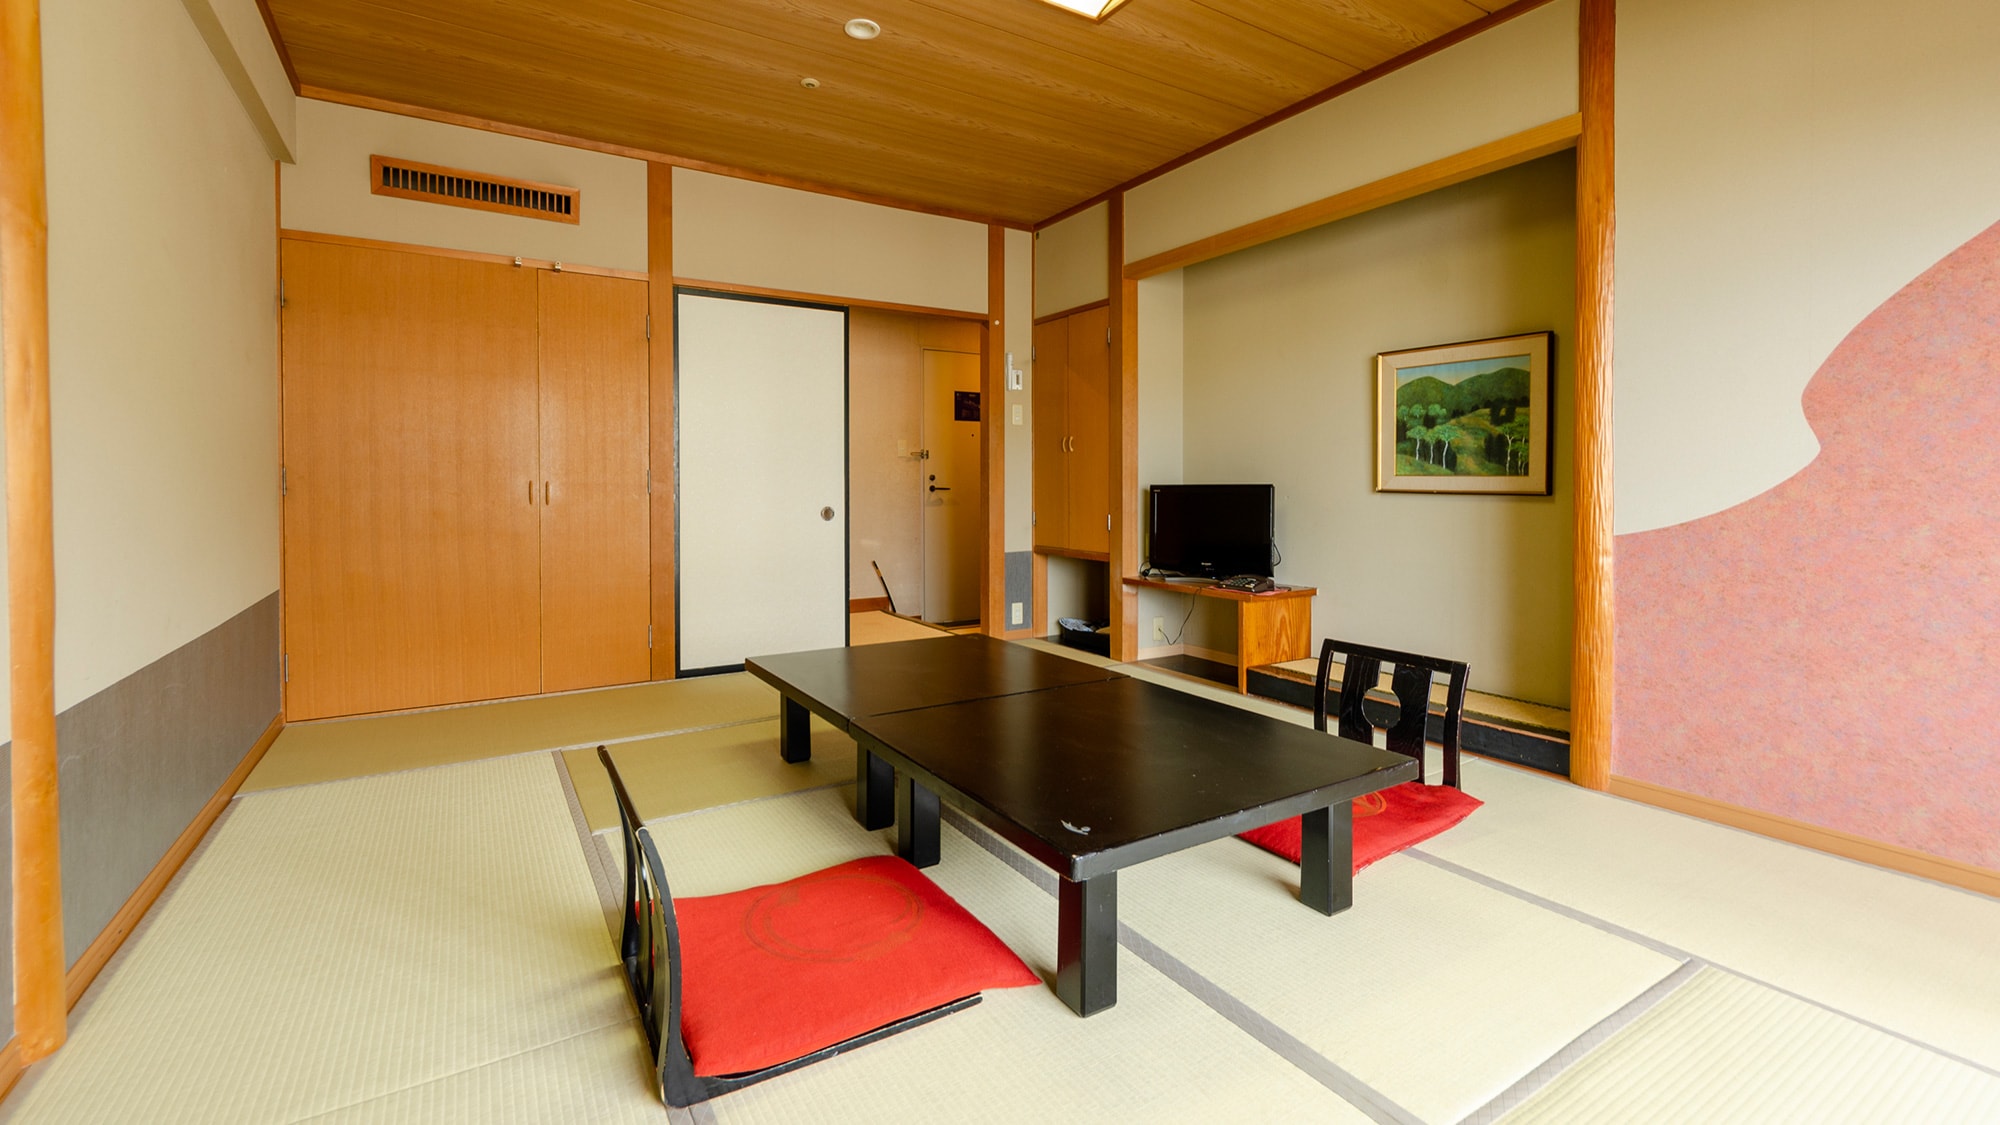 ◆ Central East Building Japanese-style room 10 tatami mats or 12 tatami mats (D) (Wi-Fi available)